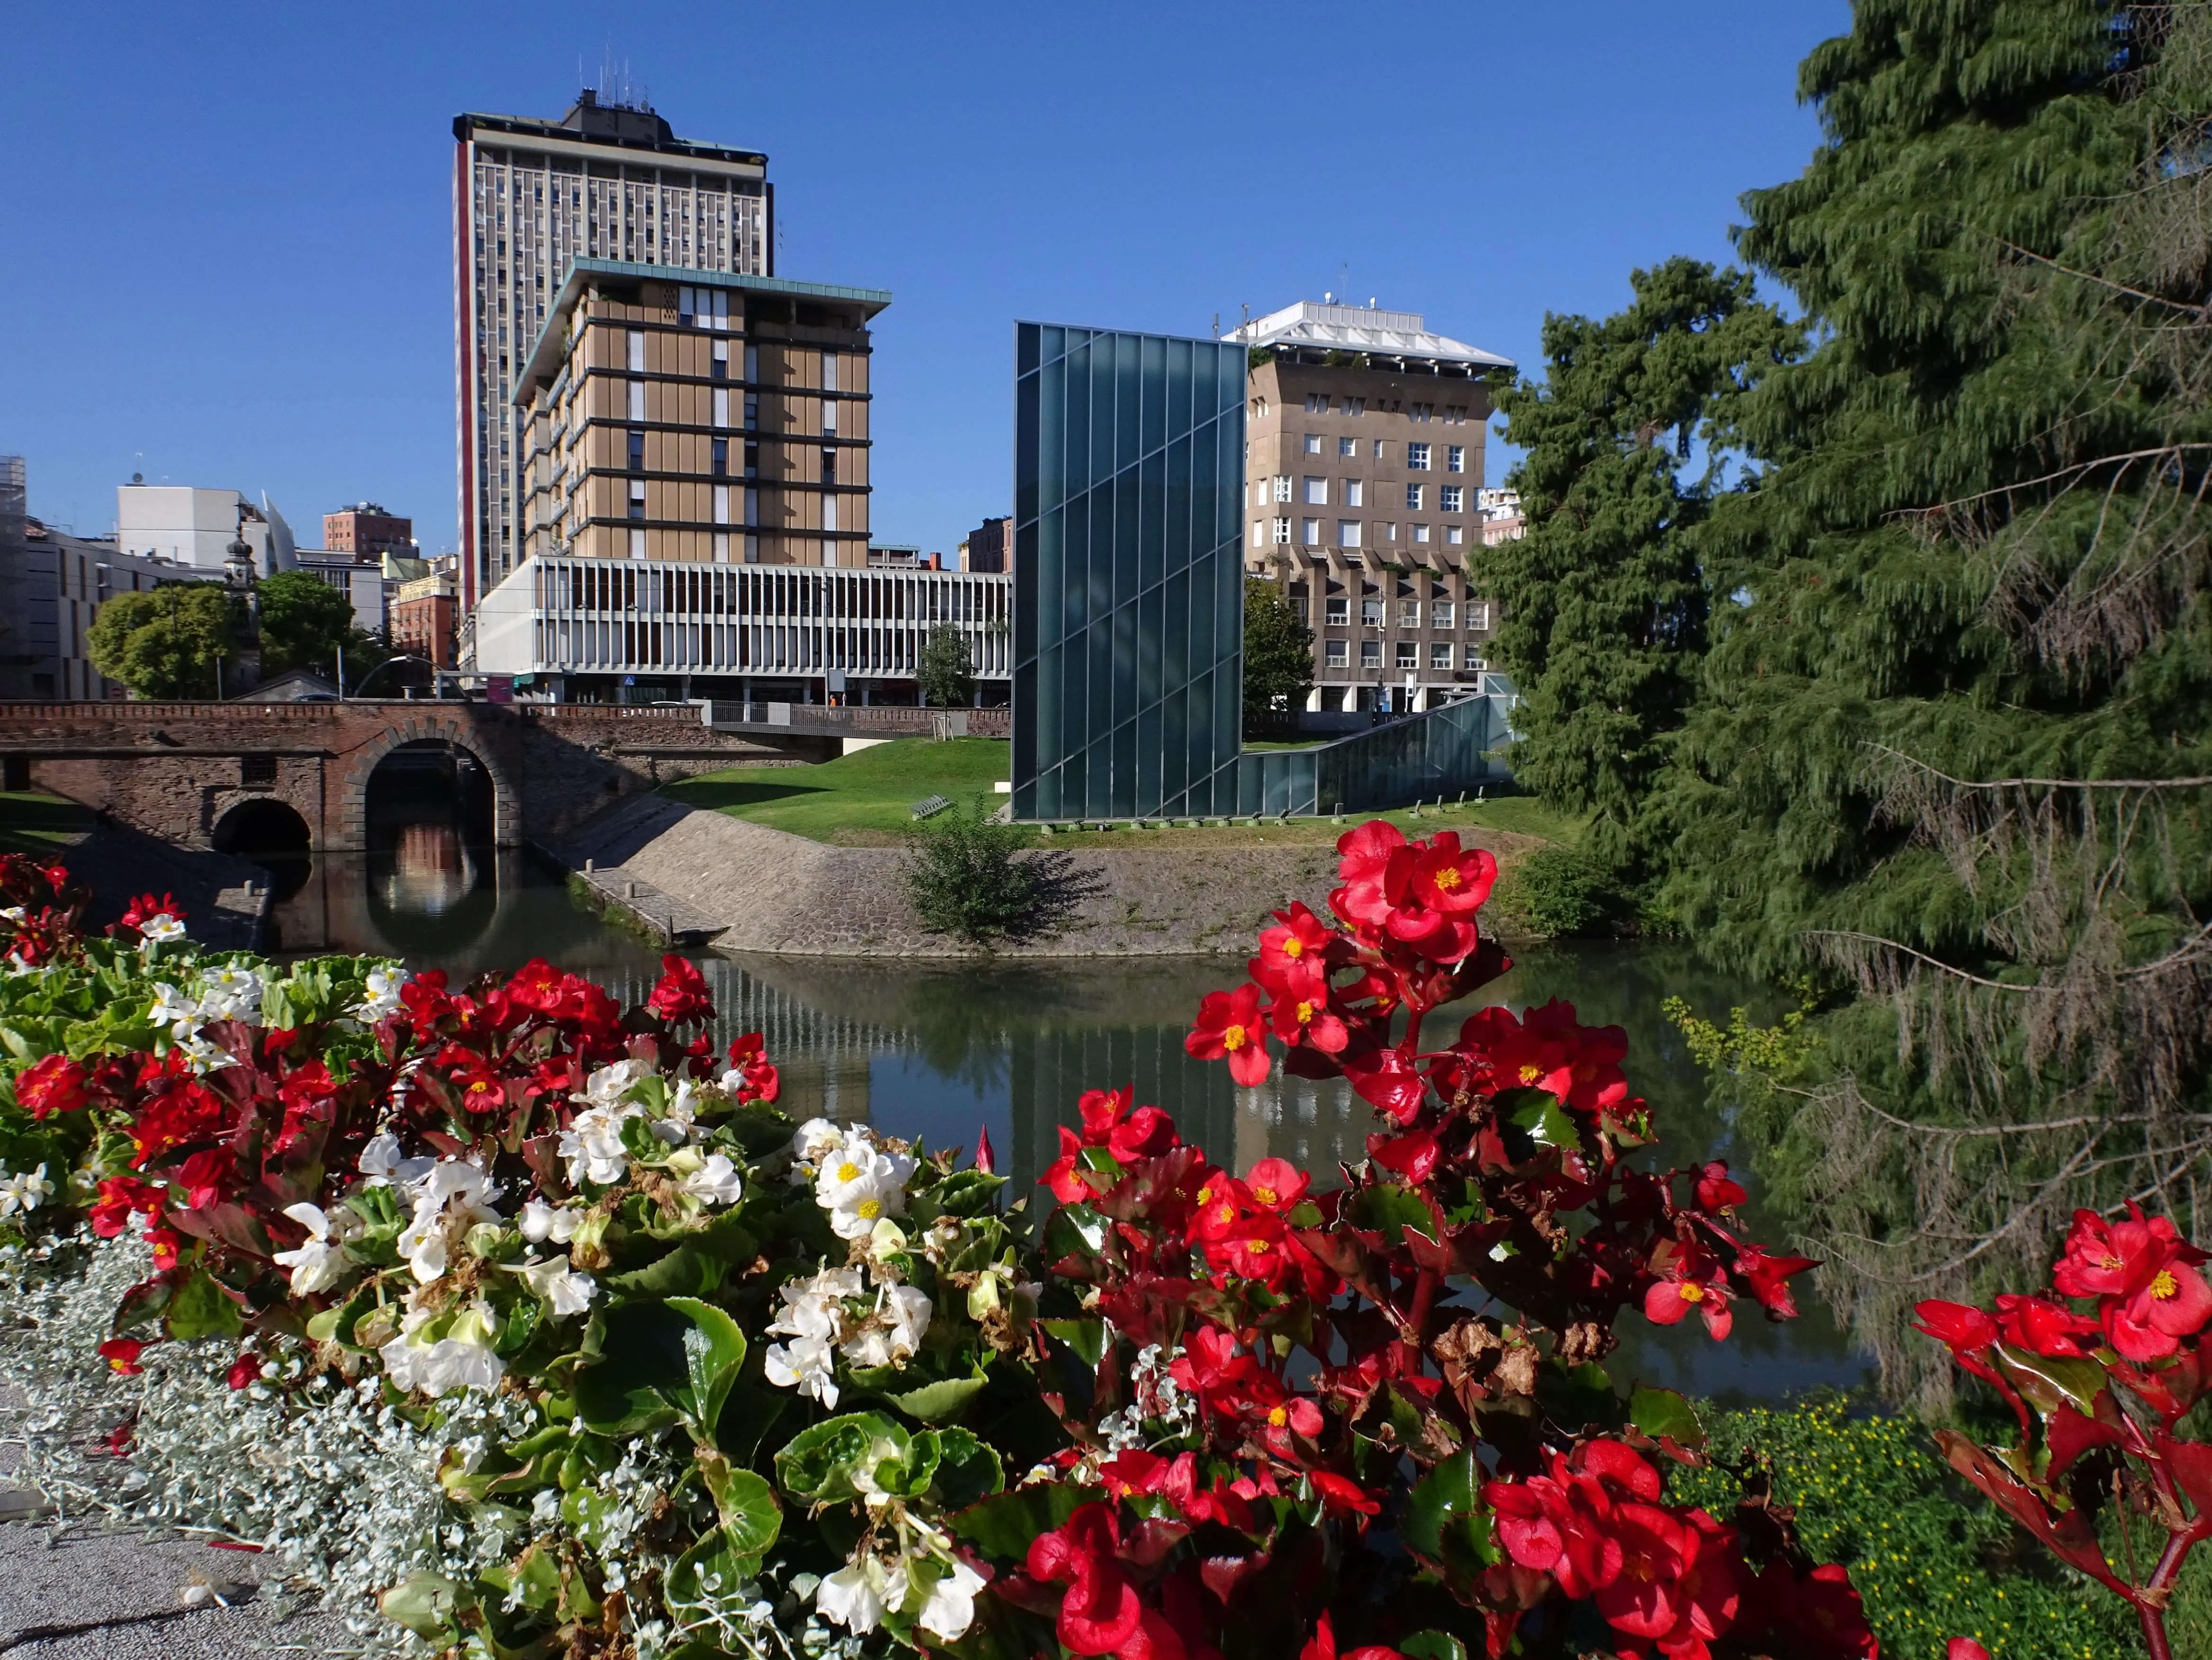 A river surrounded by buildings and seen over a bunch of blooming flowers